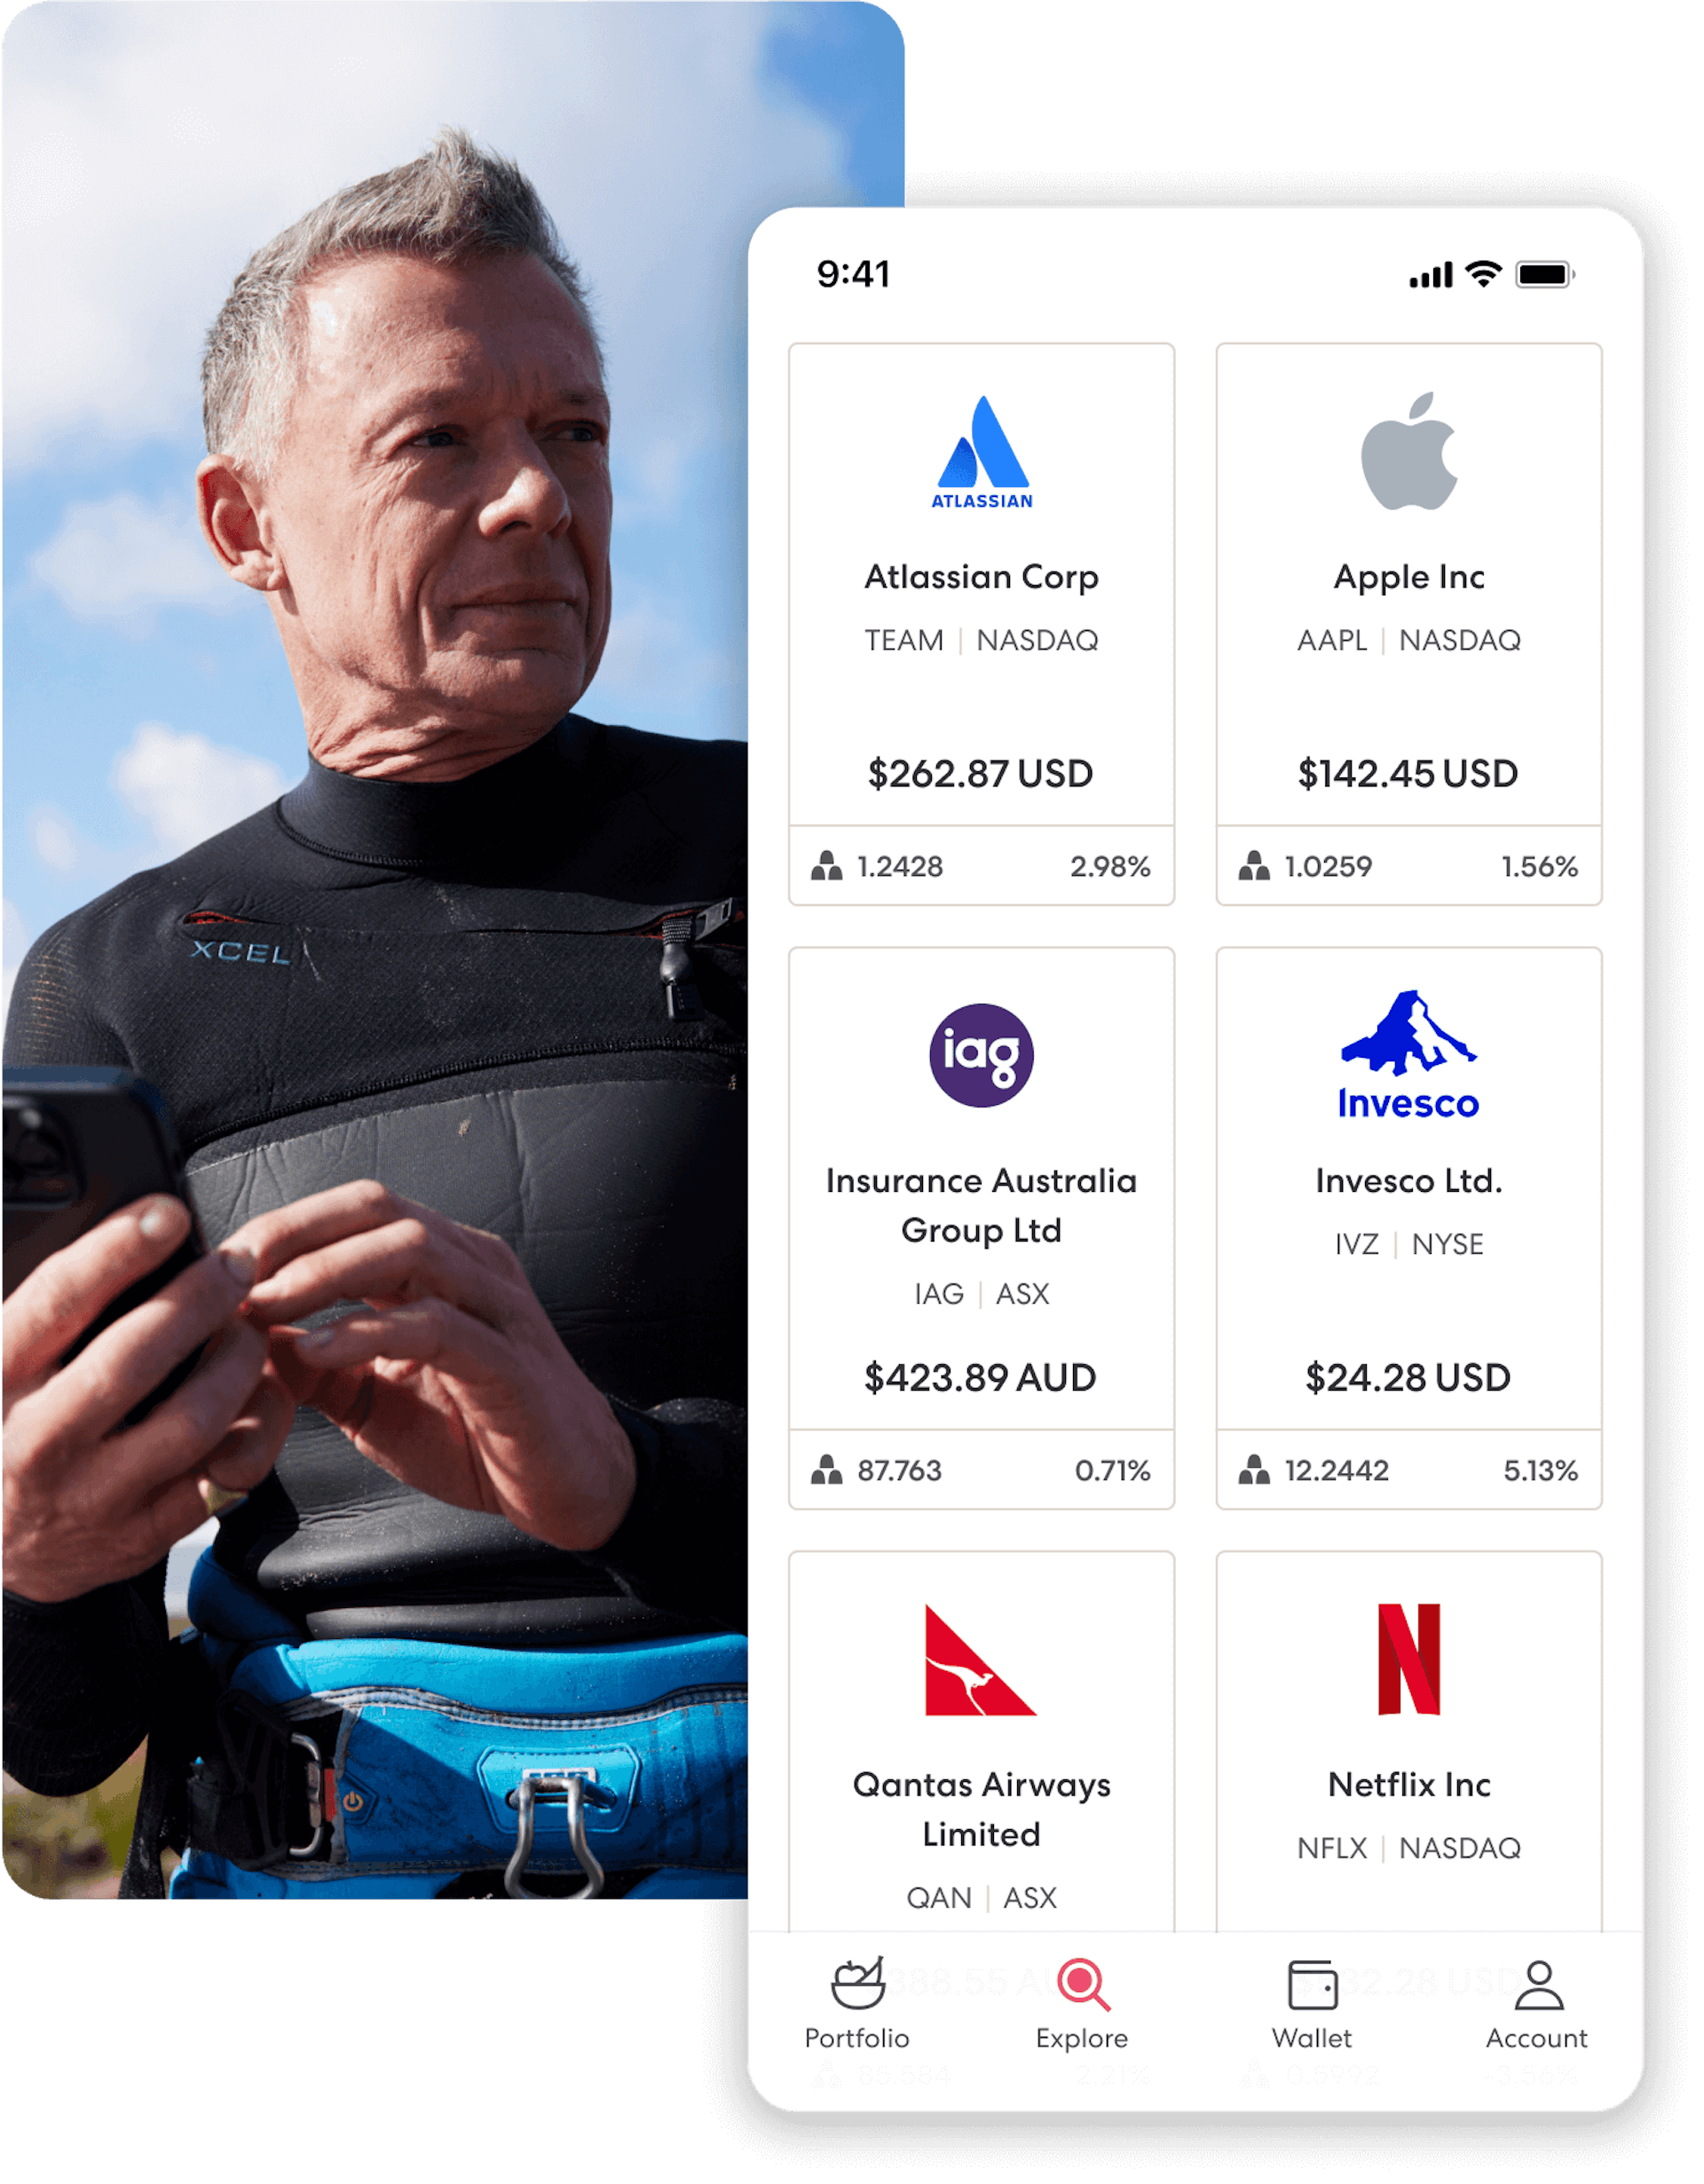 In the background, a middle-aged man in a wetsuit clutches a phone. In the foreground, an investment portfolio containing Atlassian, Apple, IAG, Invesco, Qantas, and Netflix is shown in the Sharesies app.